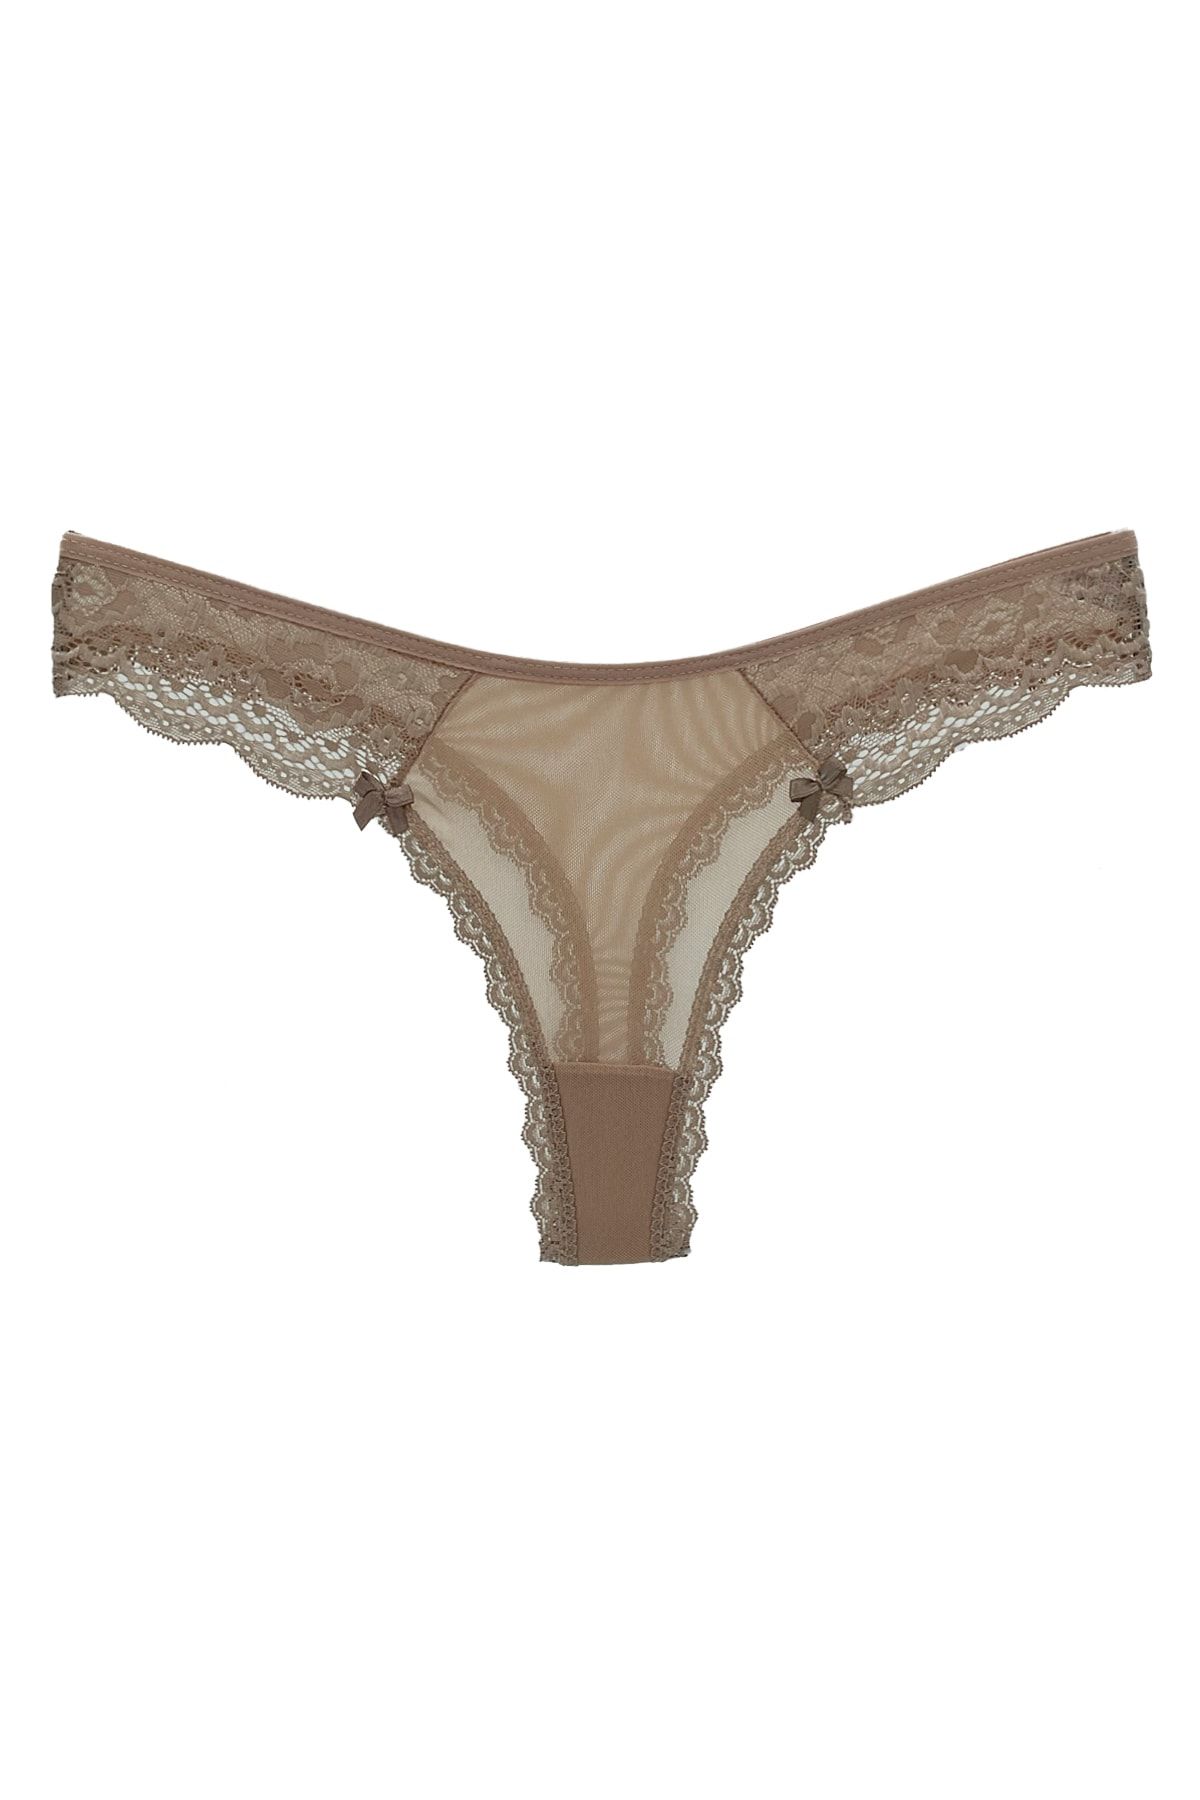 HNX Skinny Front and Back Tulle Lace Detailed Thong Women's